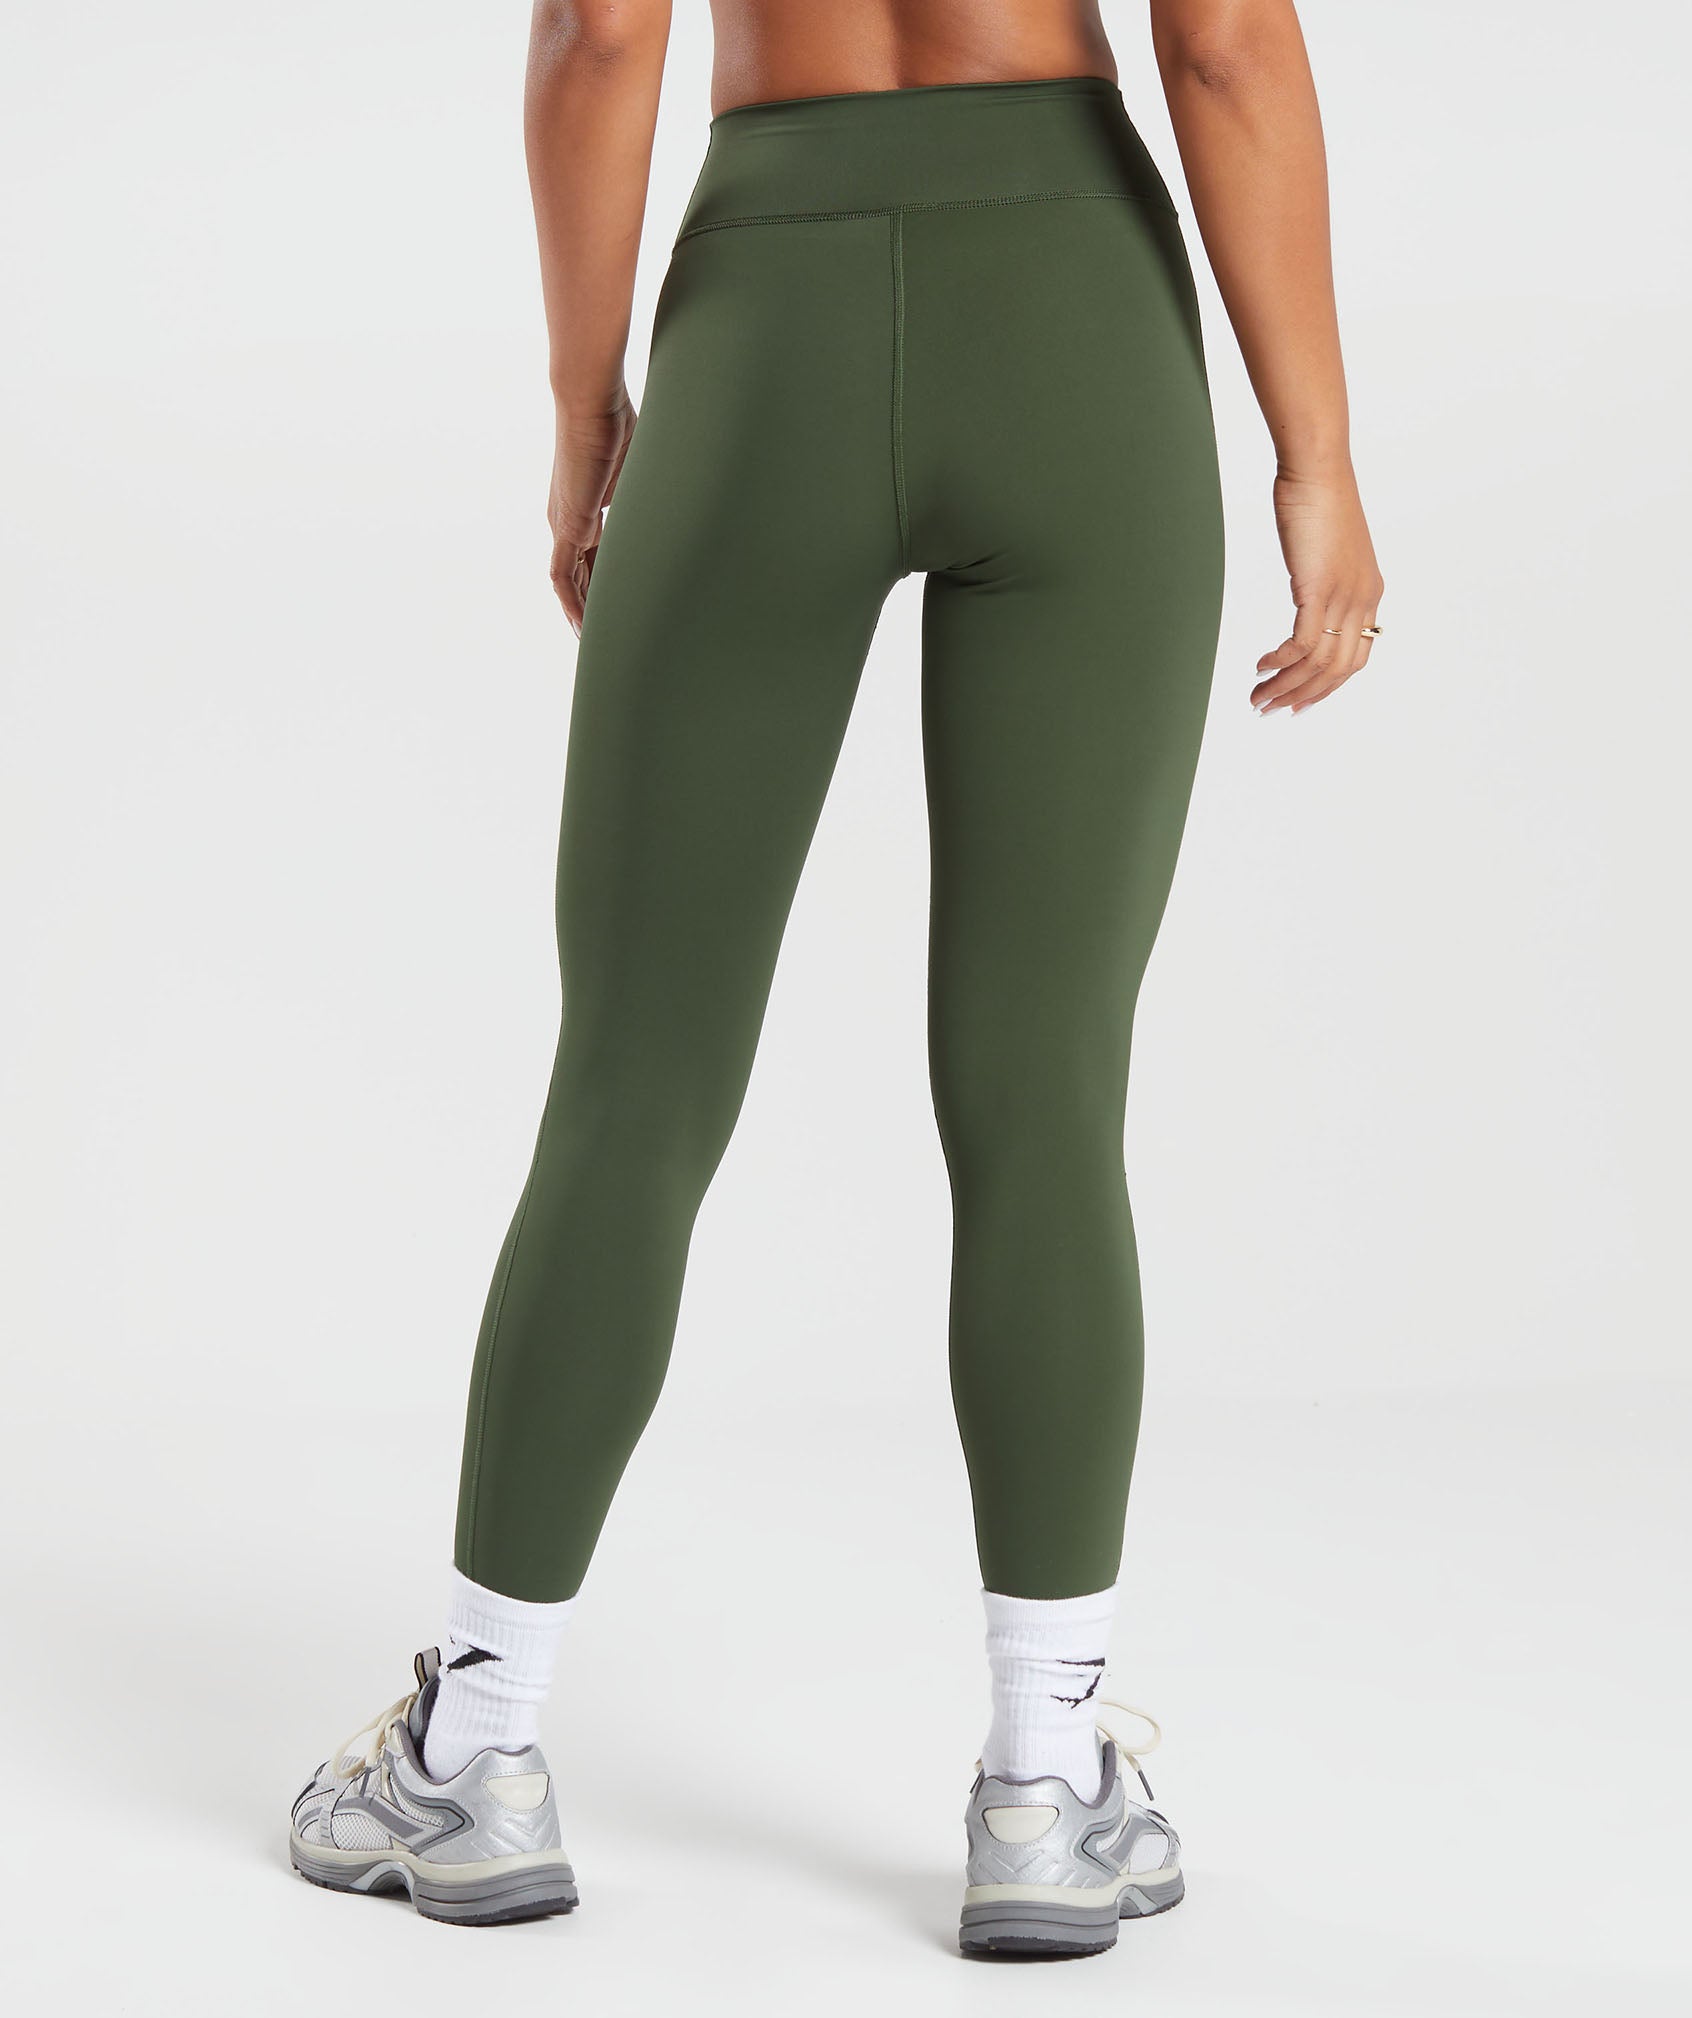 Elevate Leggings in Moss Olive - view 2